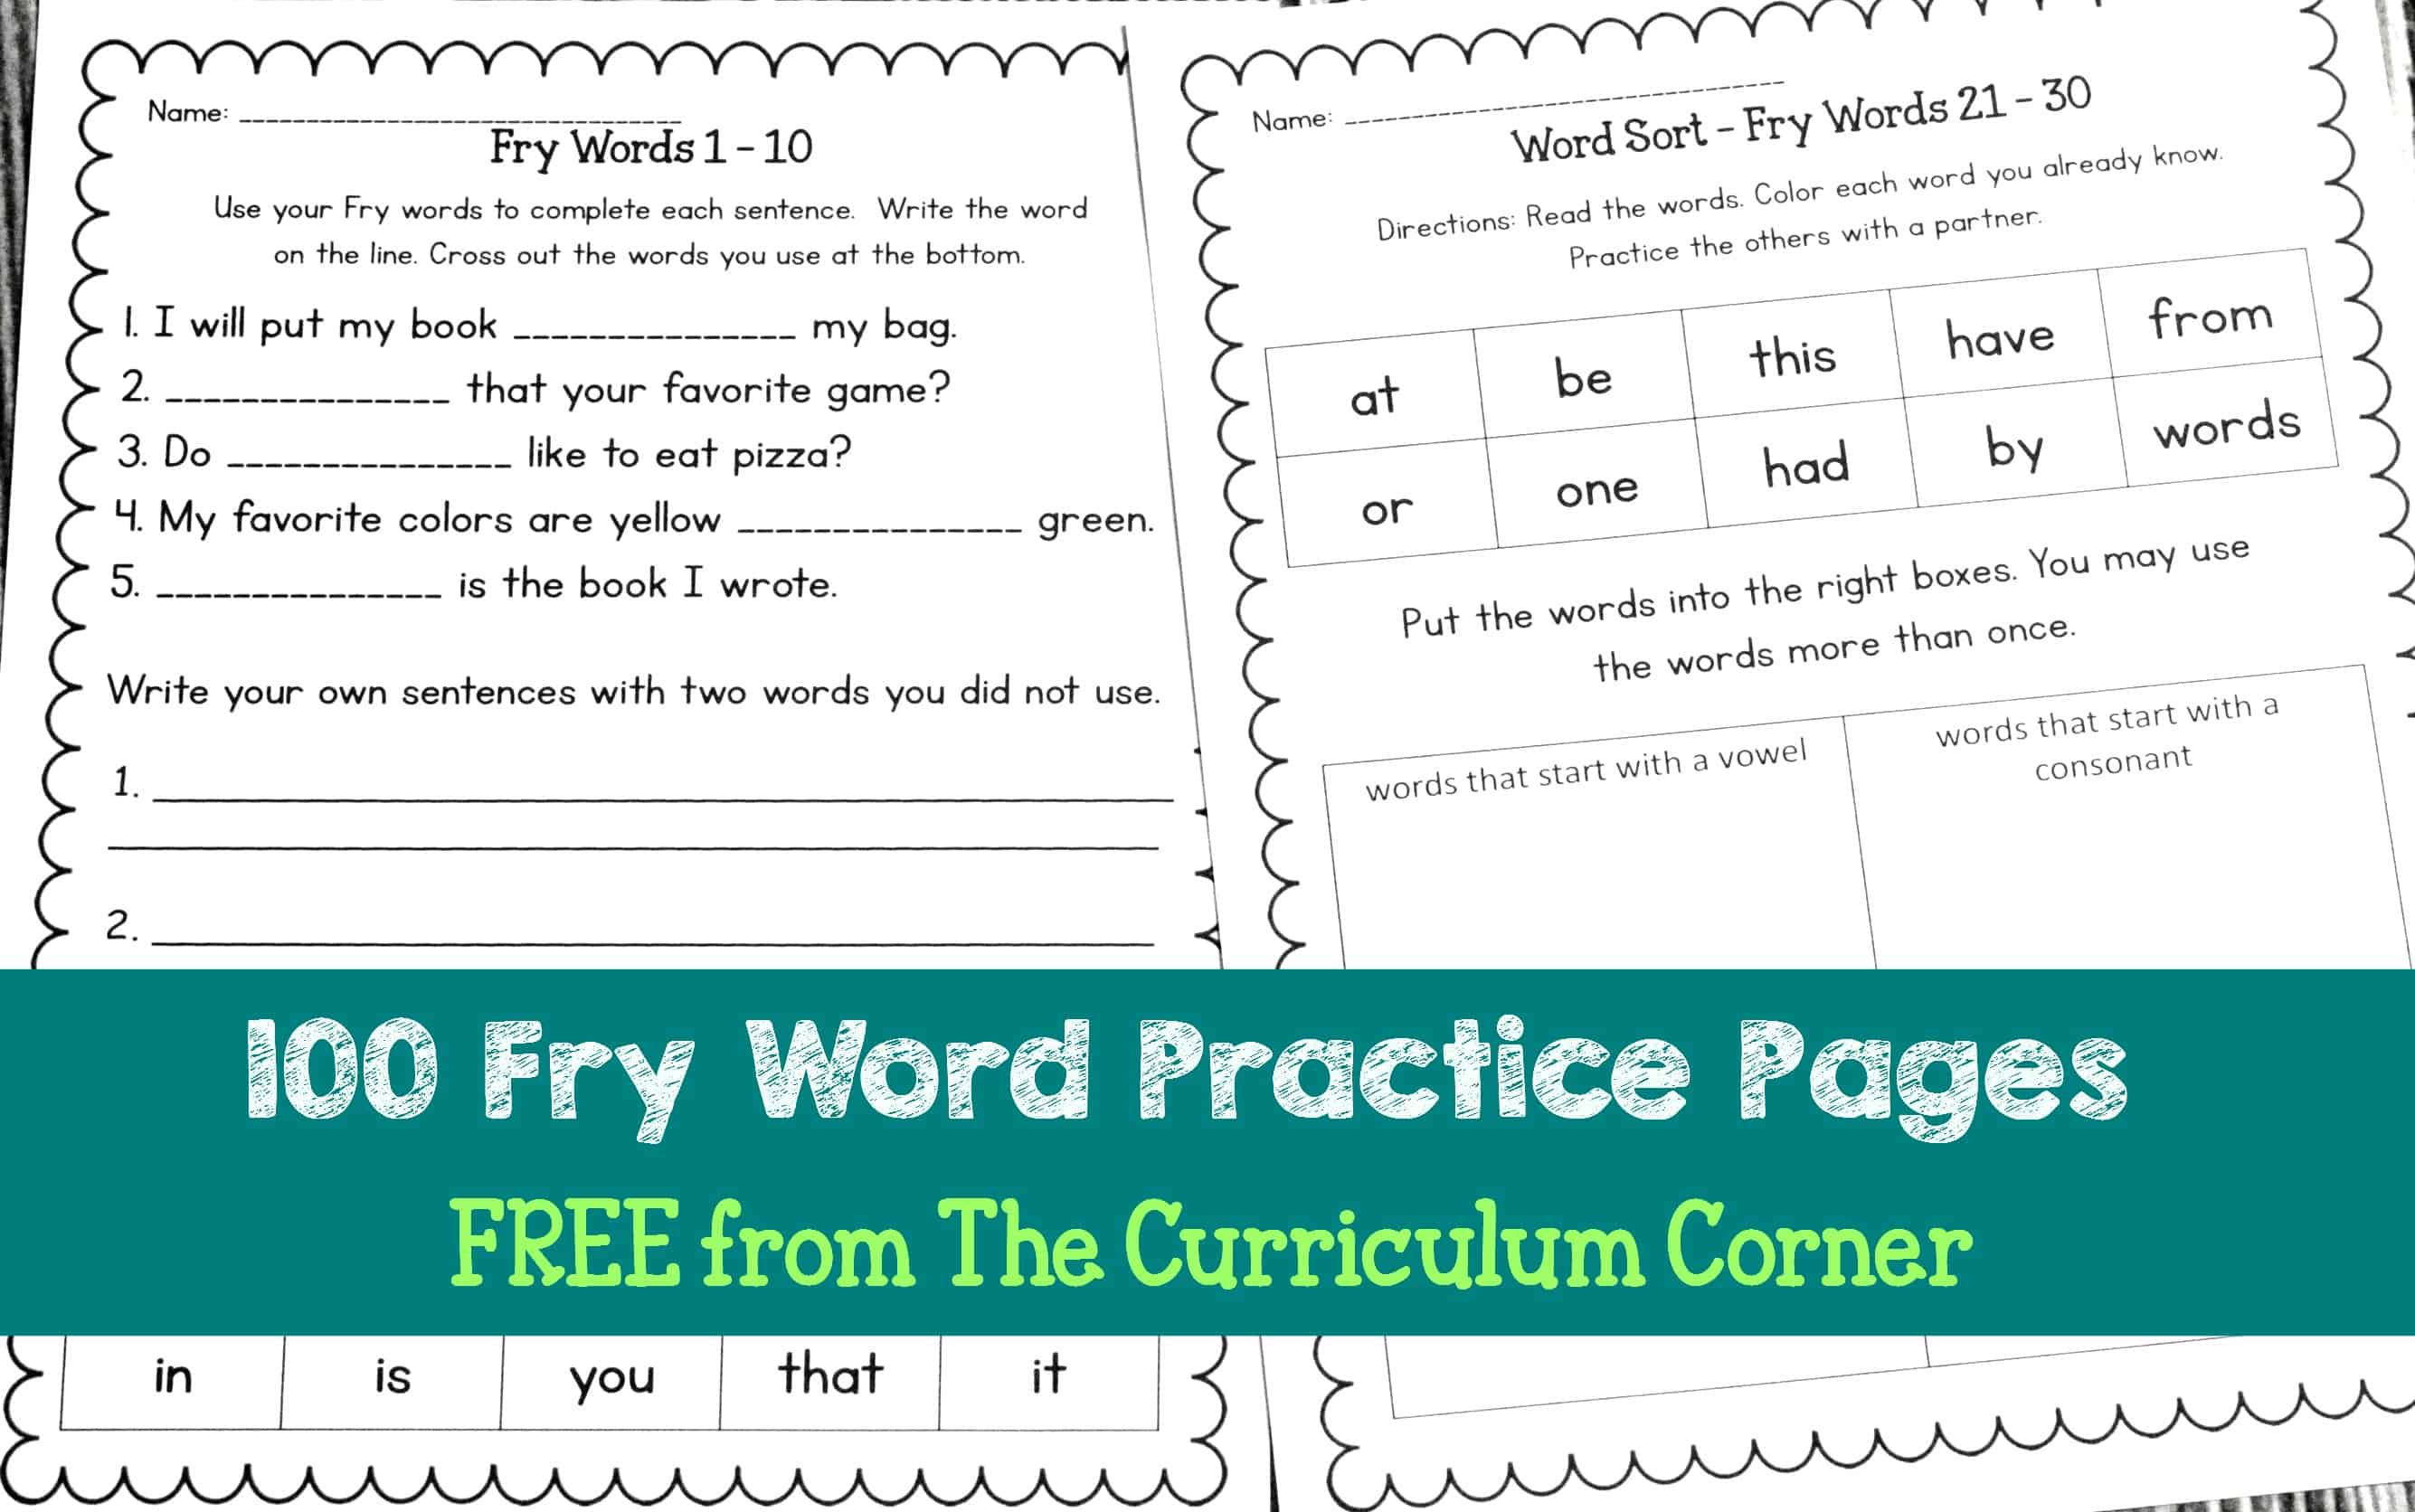 Fry Word Practice Pages The Curriculum Corner 123